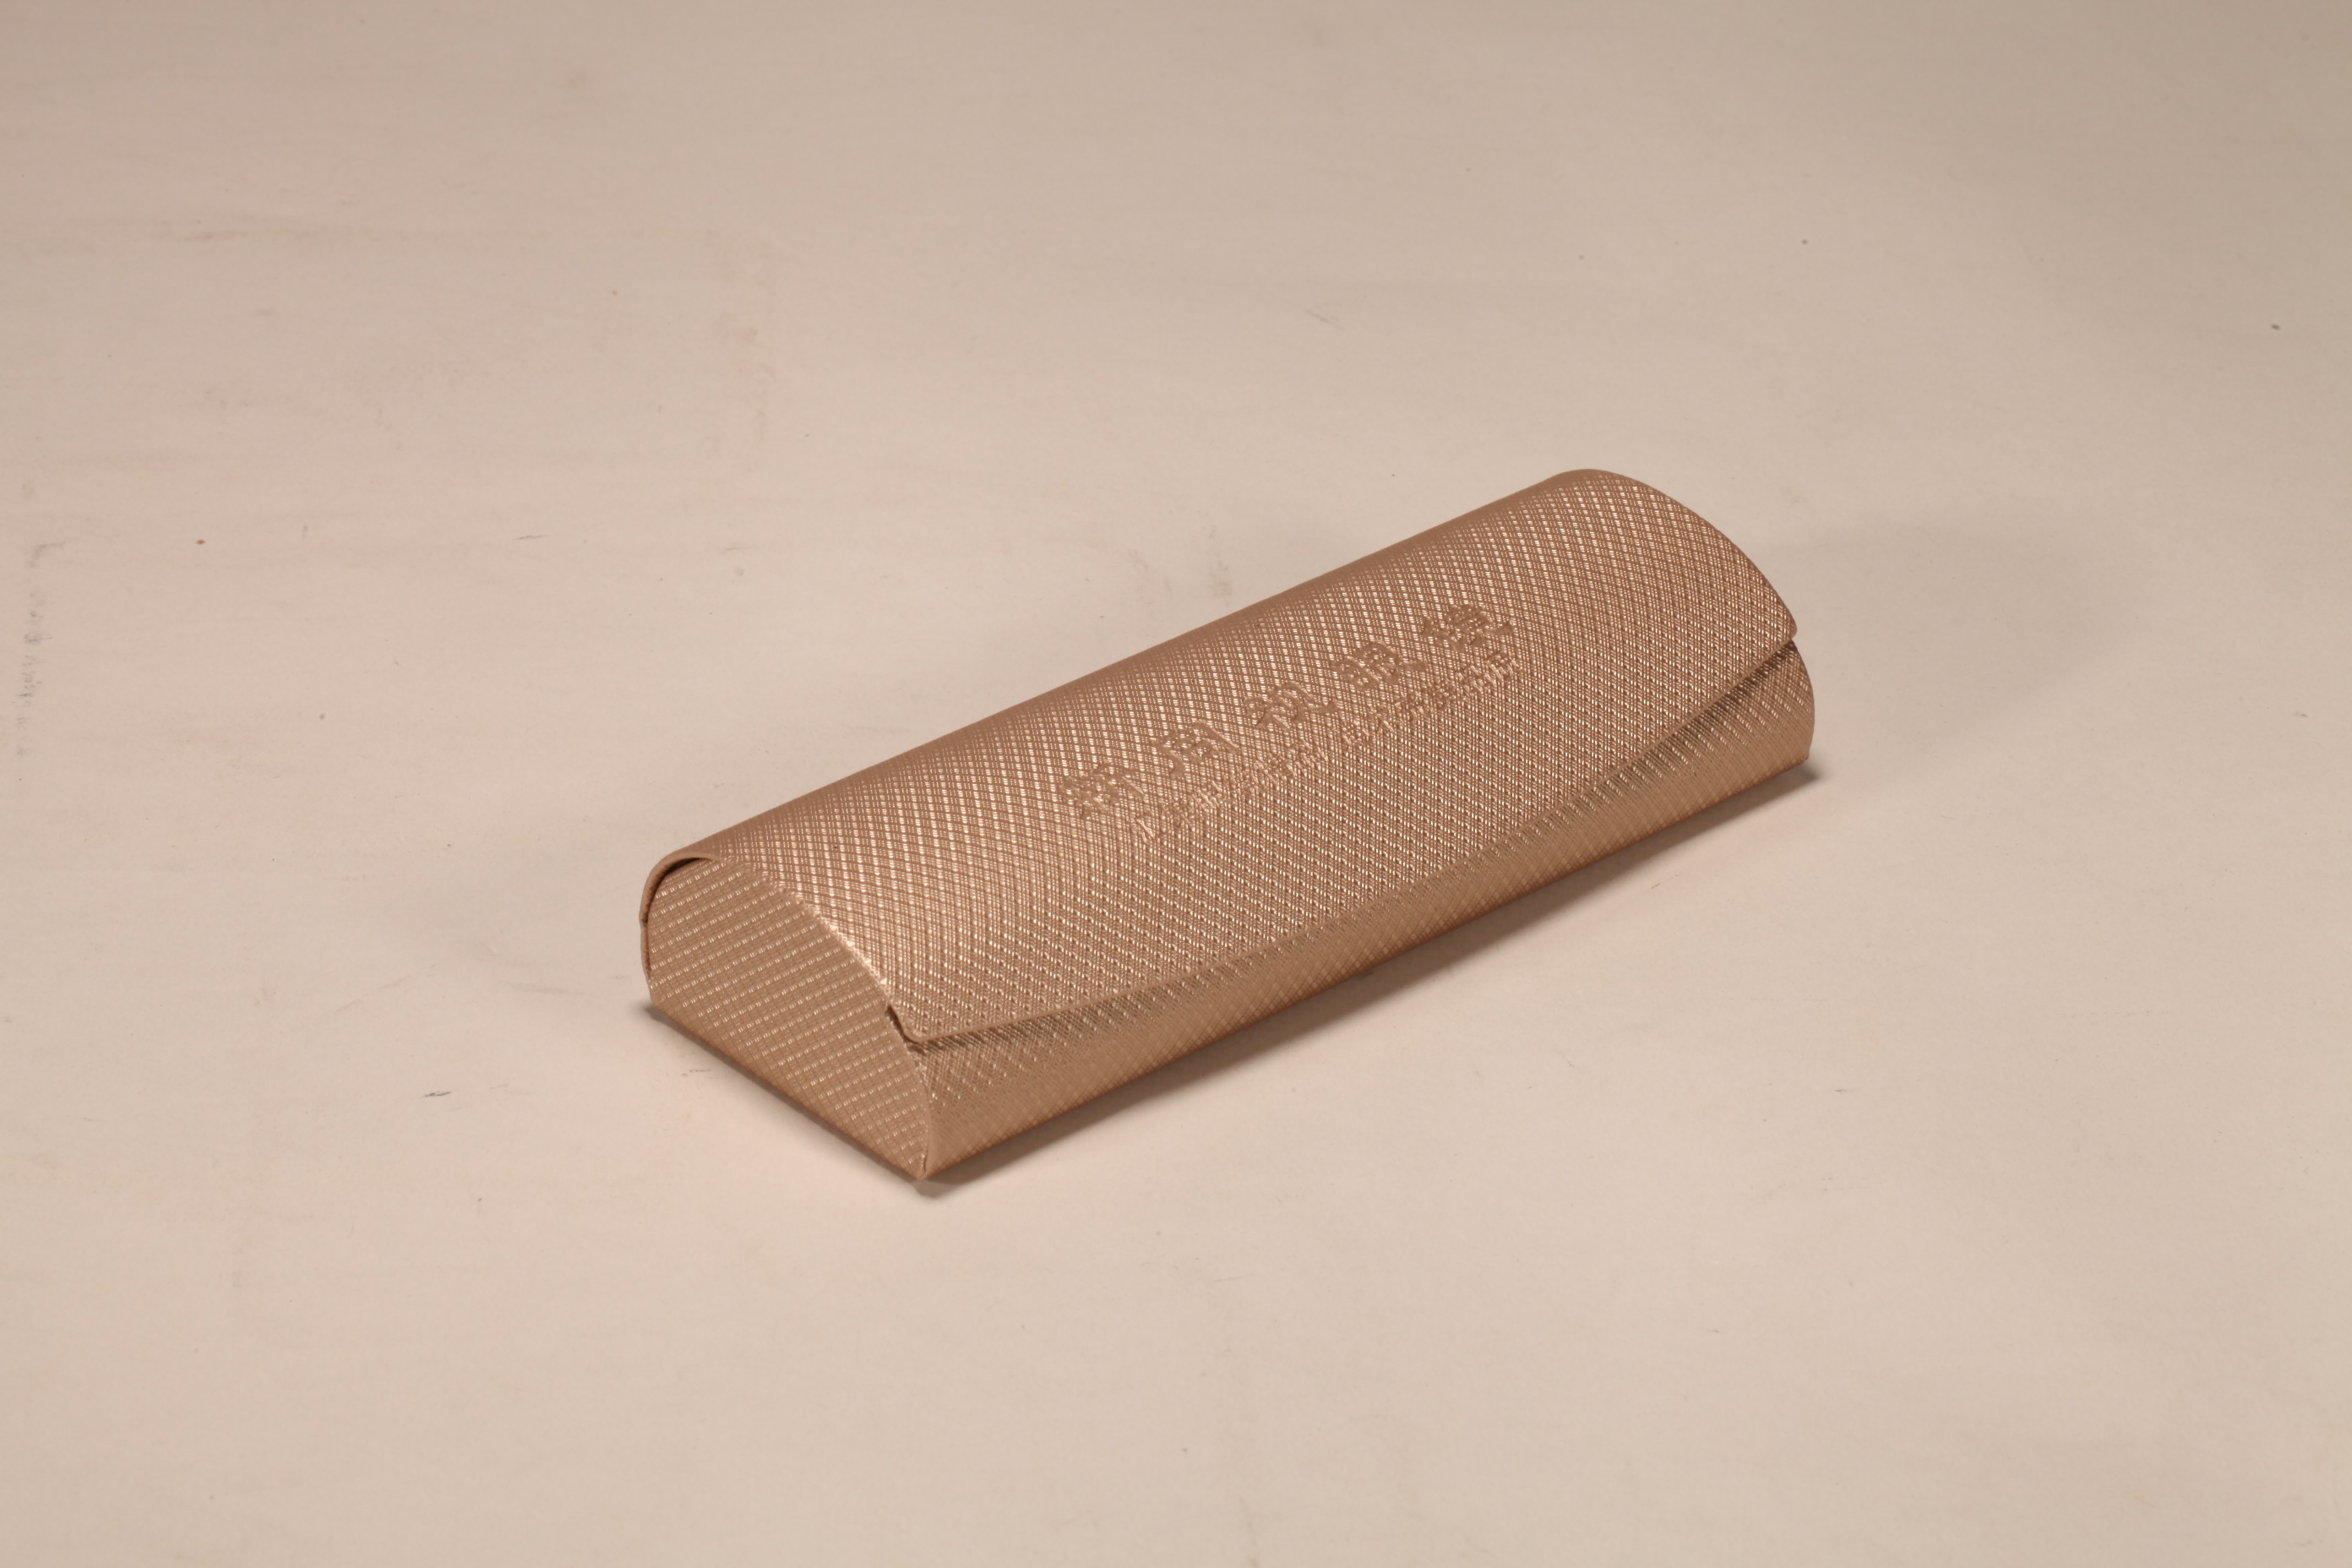 A brown-gold hand-made glasses case printed with Chinese LOGO, made of canary